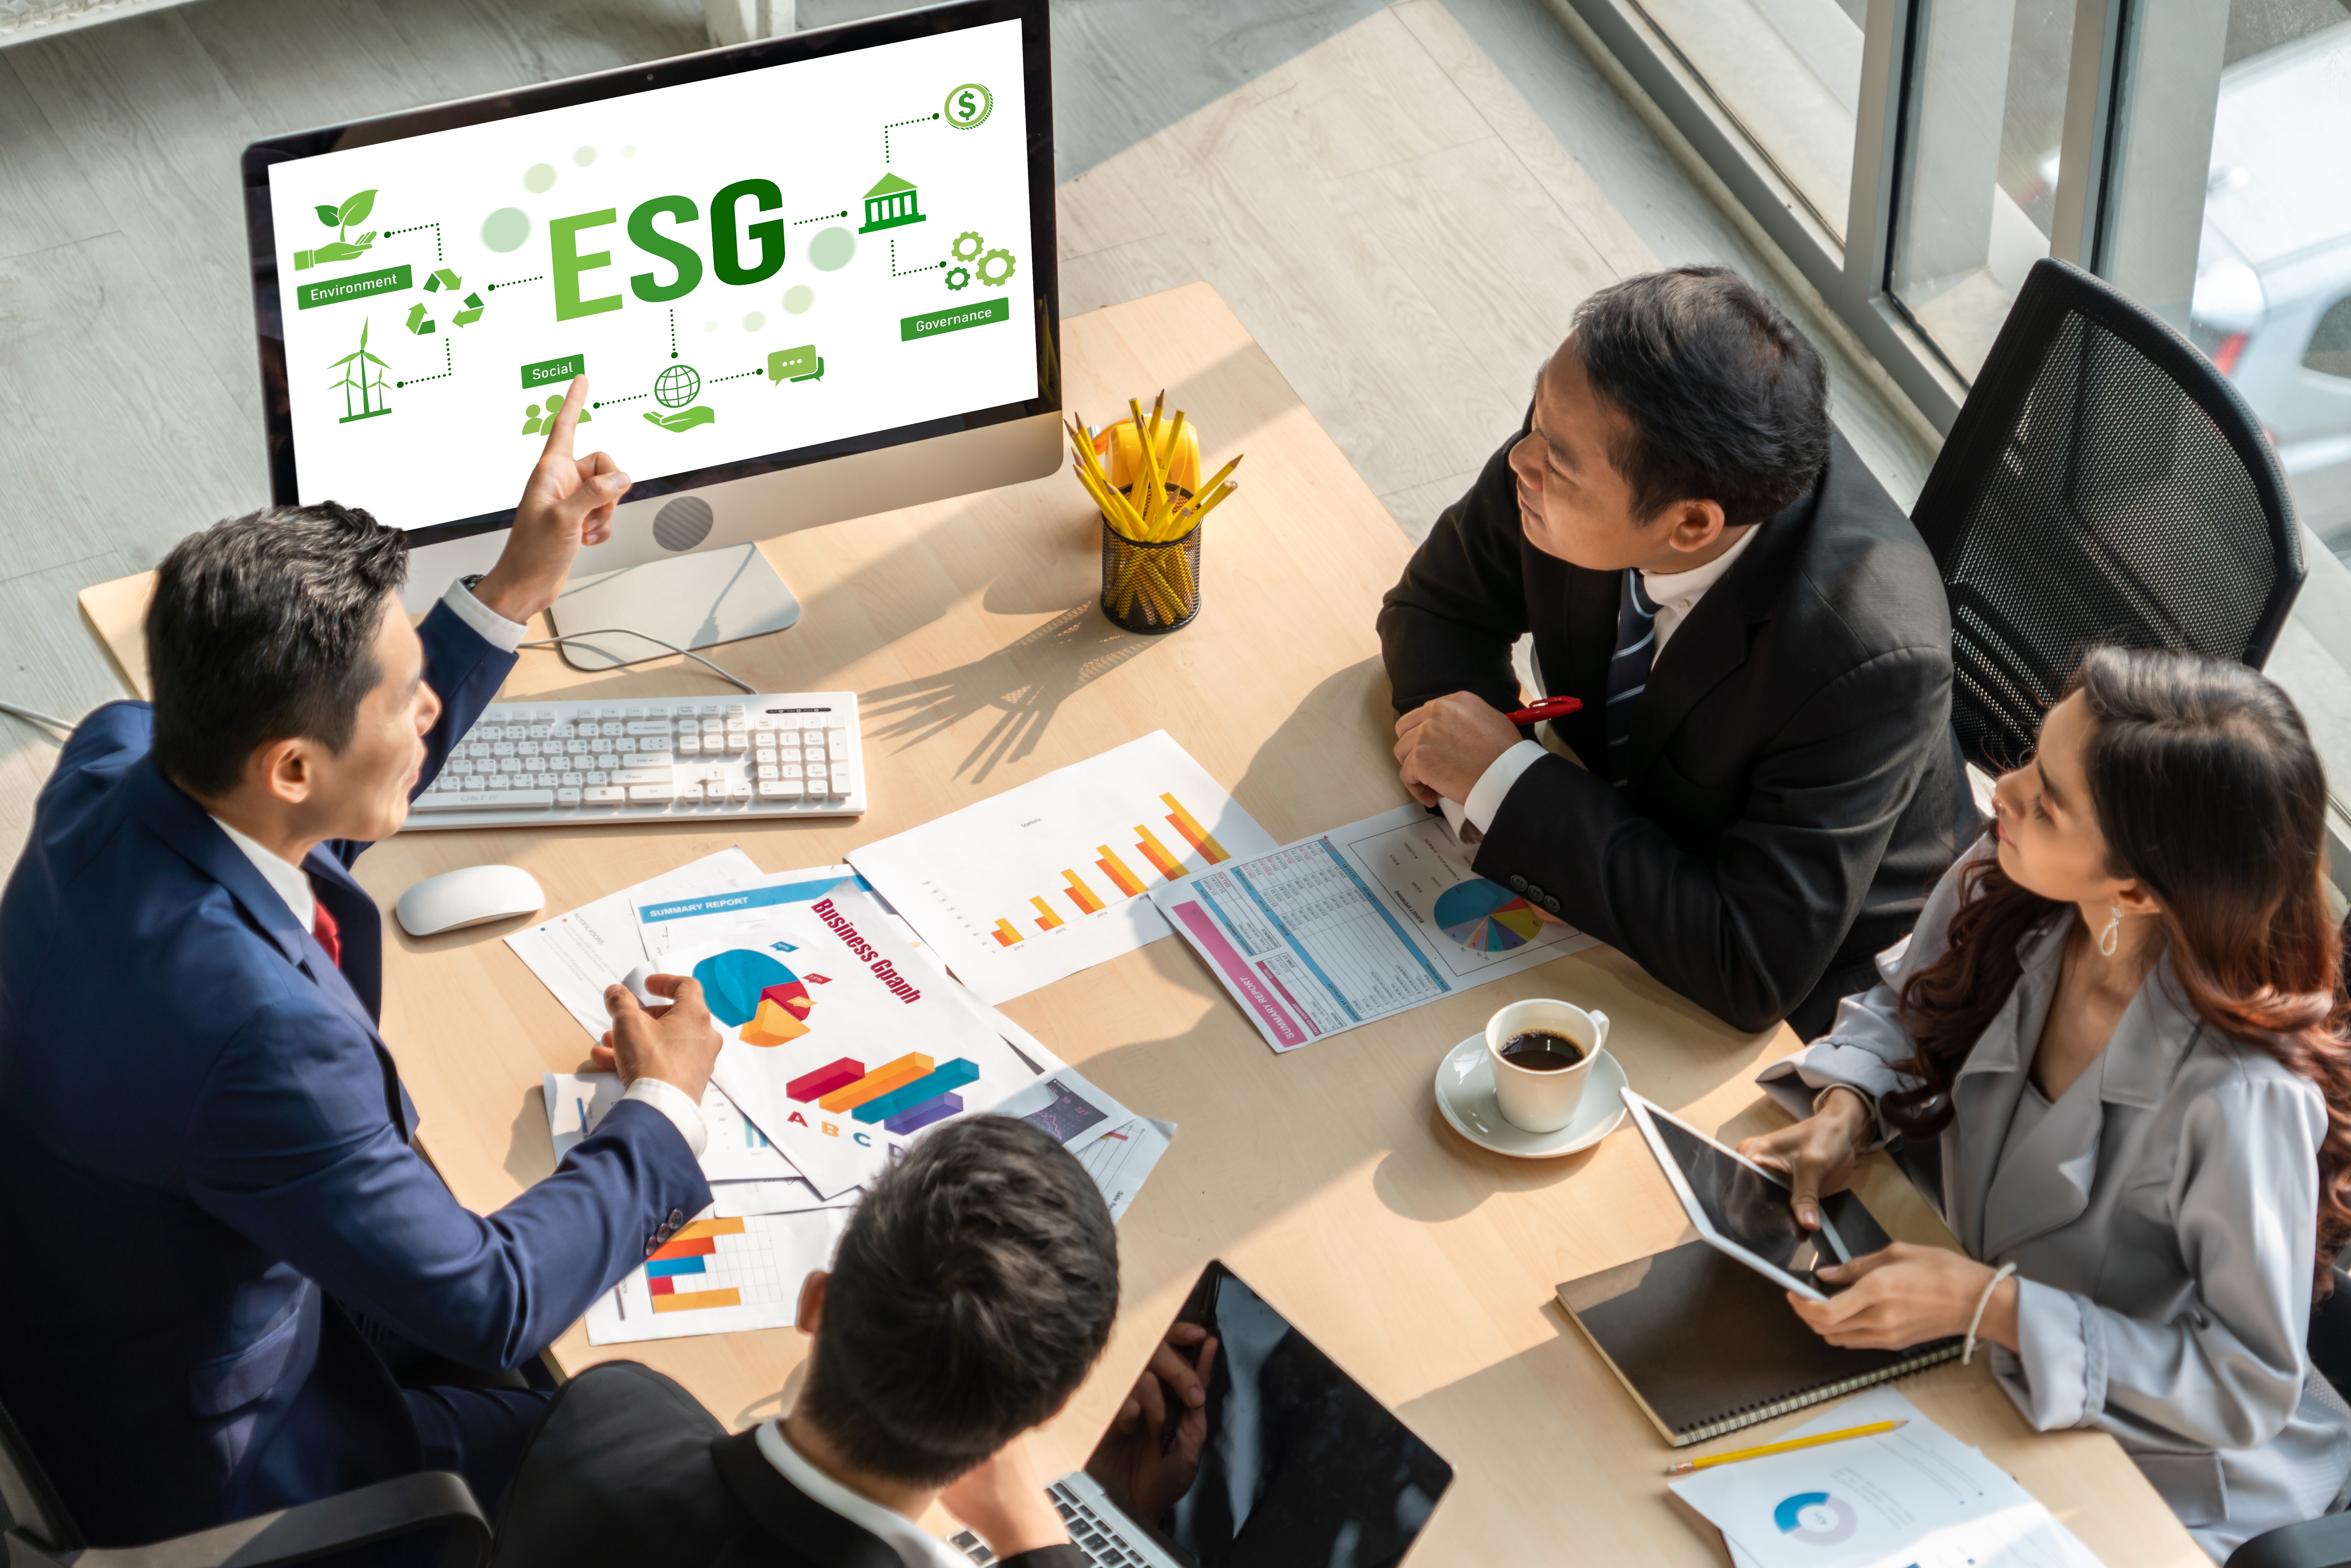 Media Release; How Asia’s businesses can jump-start their way in ESG